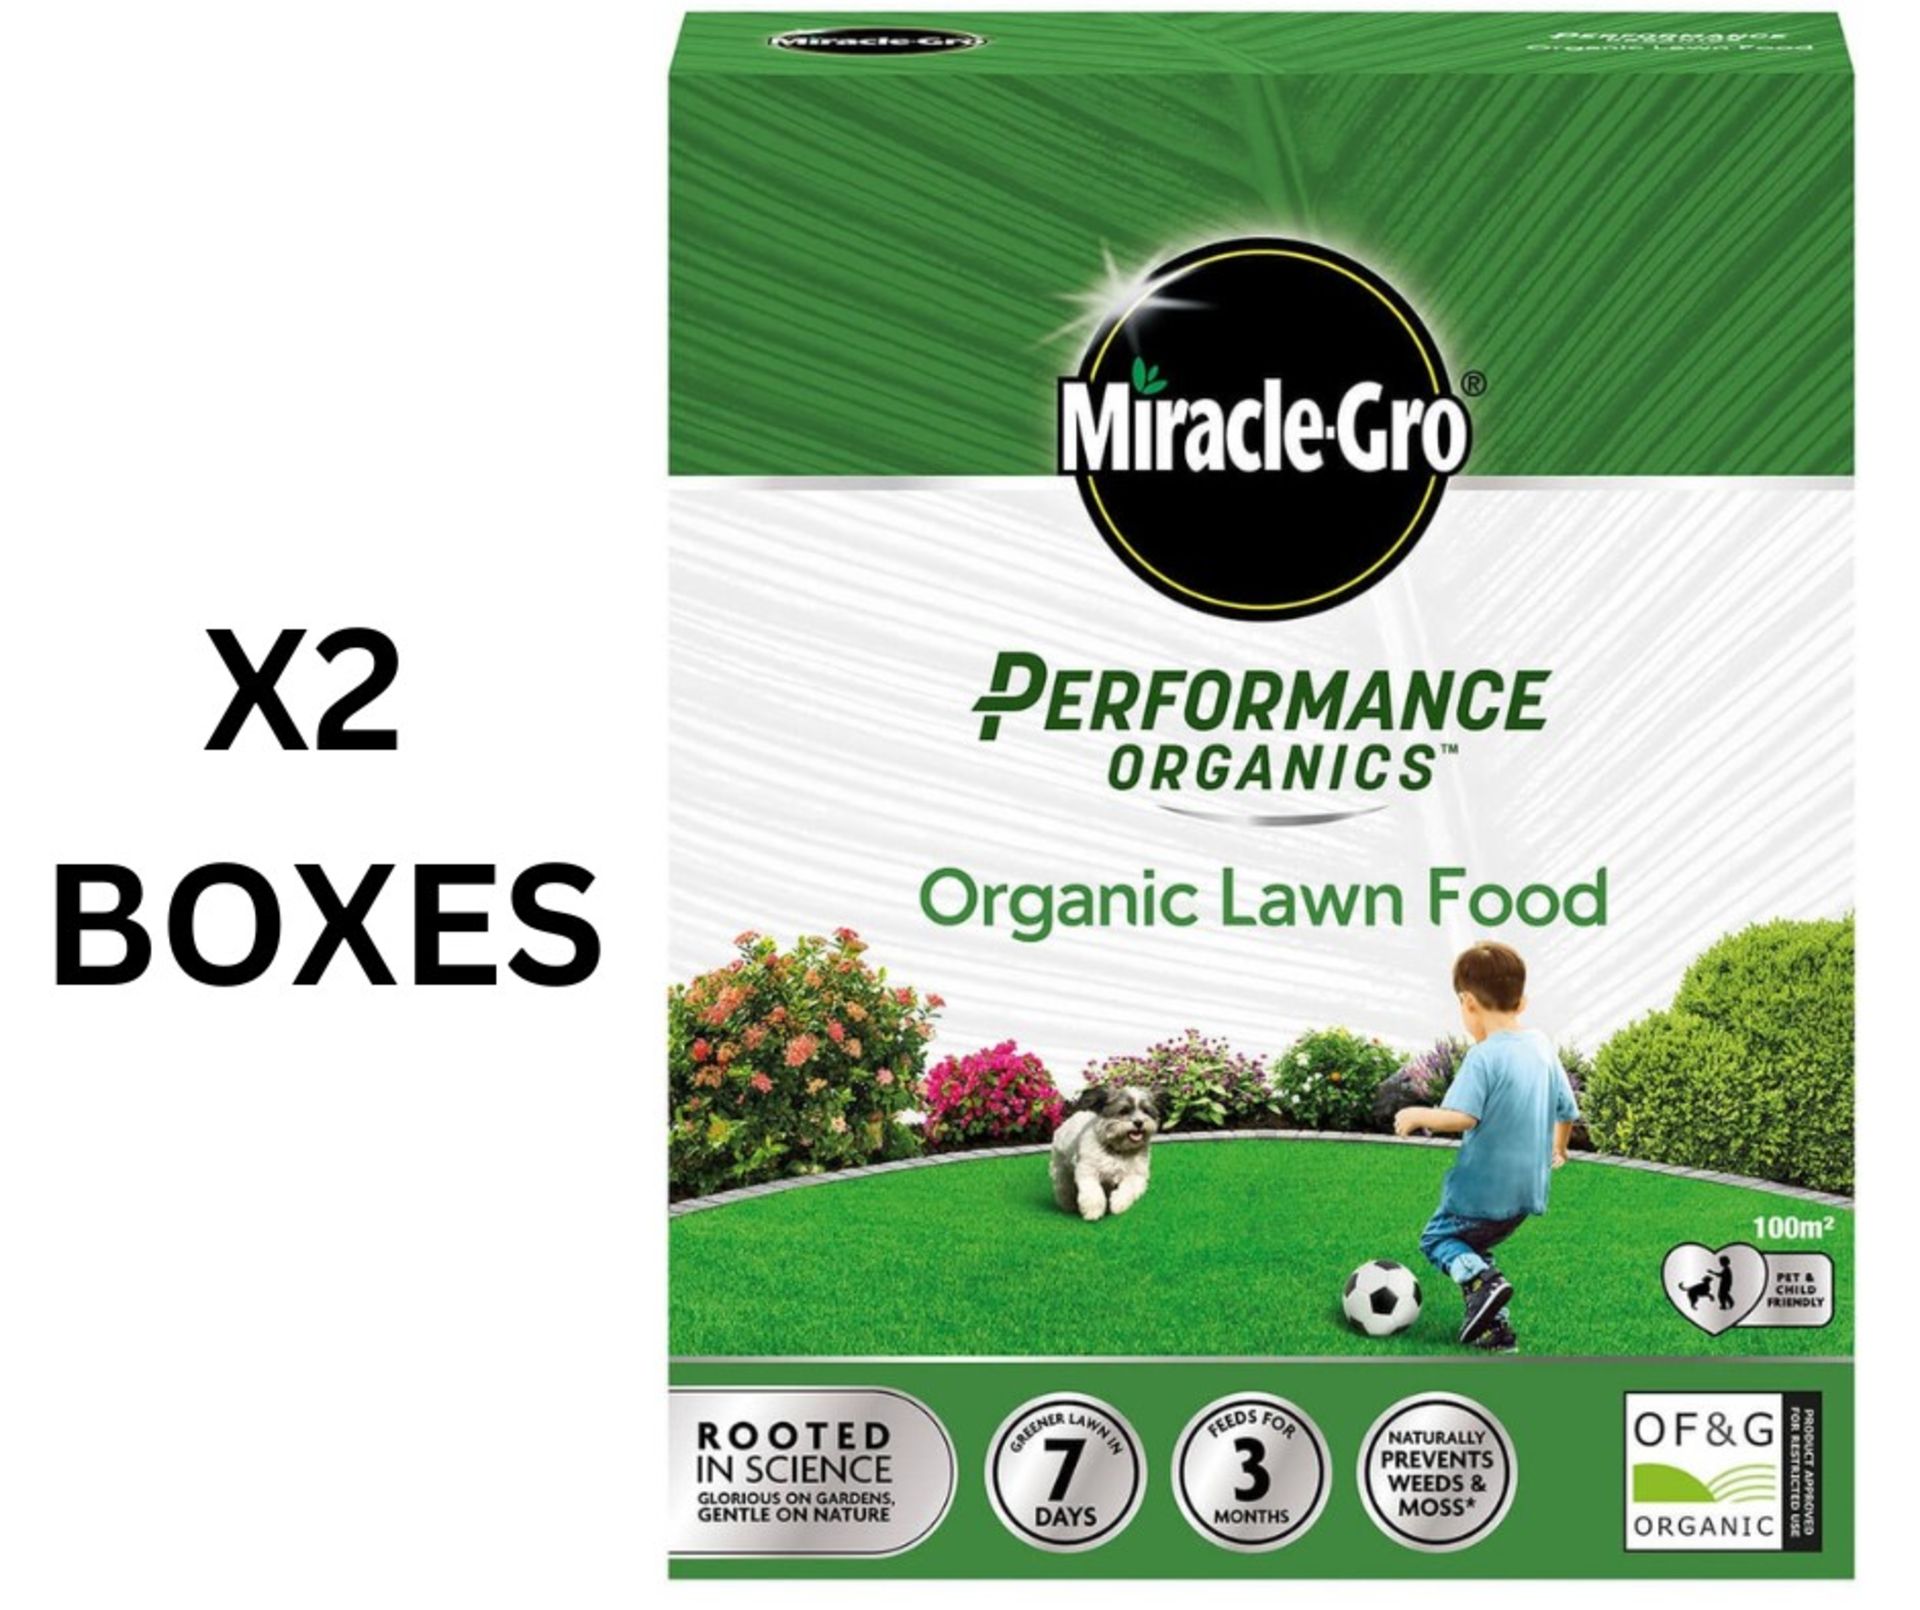 RRP £25 - X2 New Boxes Of Miracle-Gro Organic Lawn Food. Suggested to be put down in march and feeds